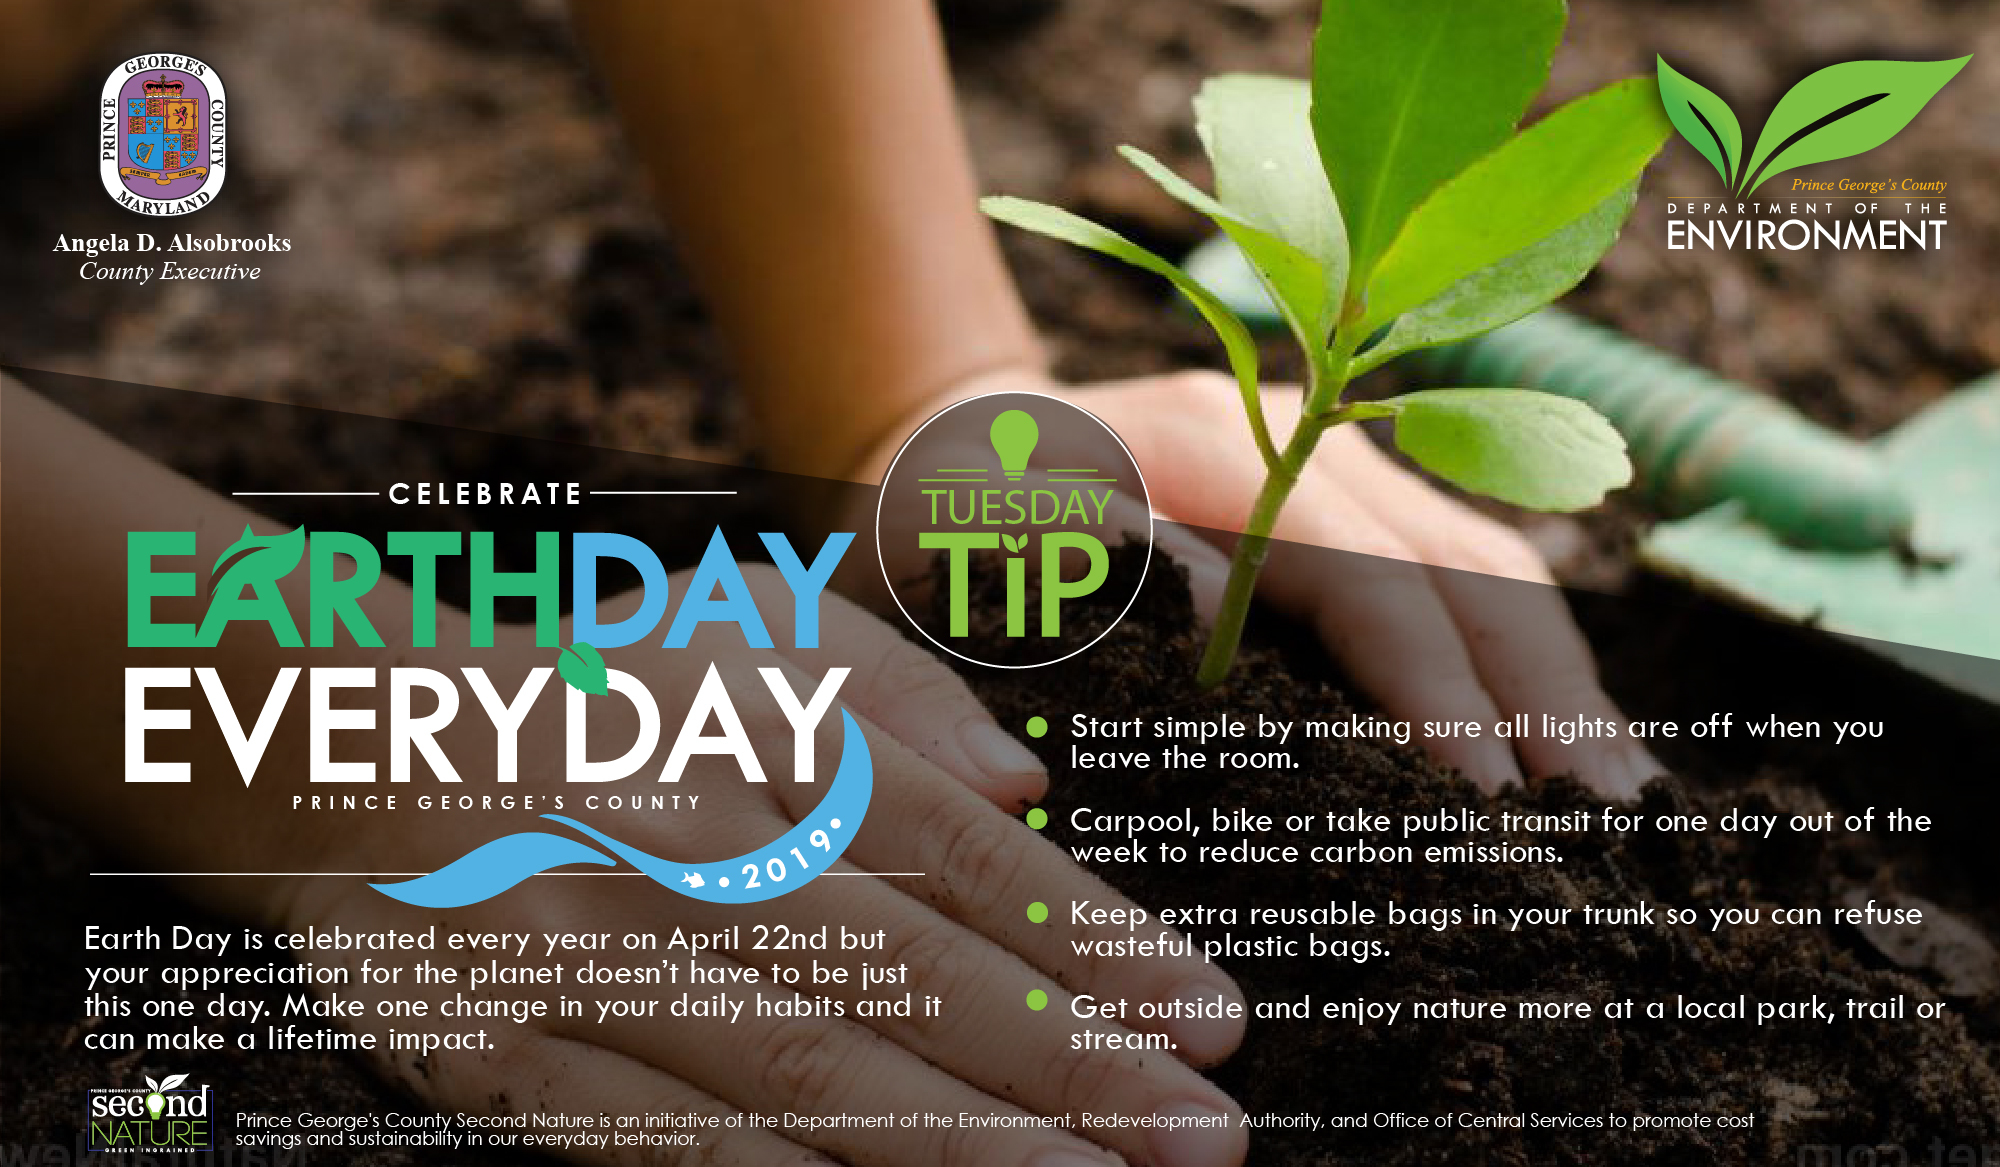 Tues tip 4.16.19 Earth Day